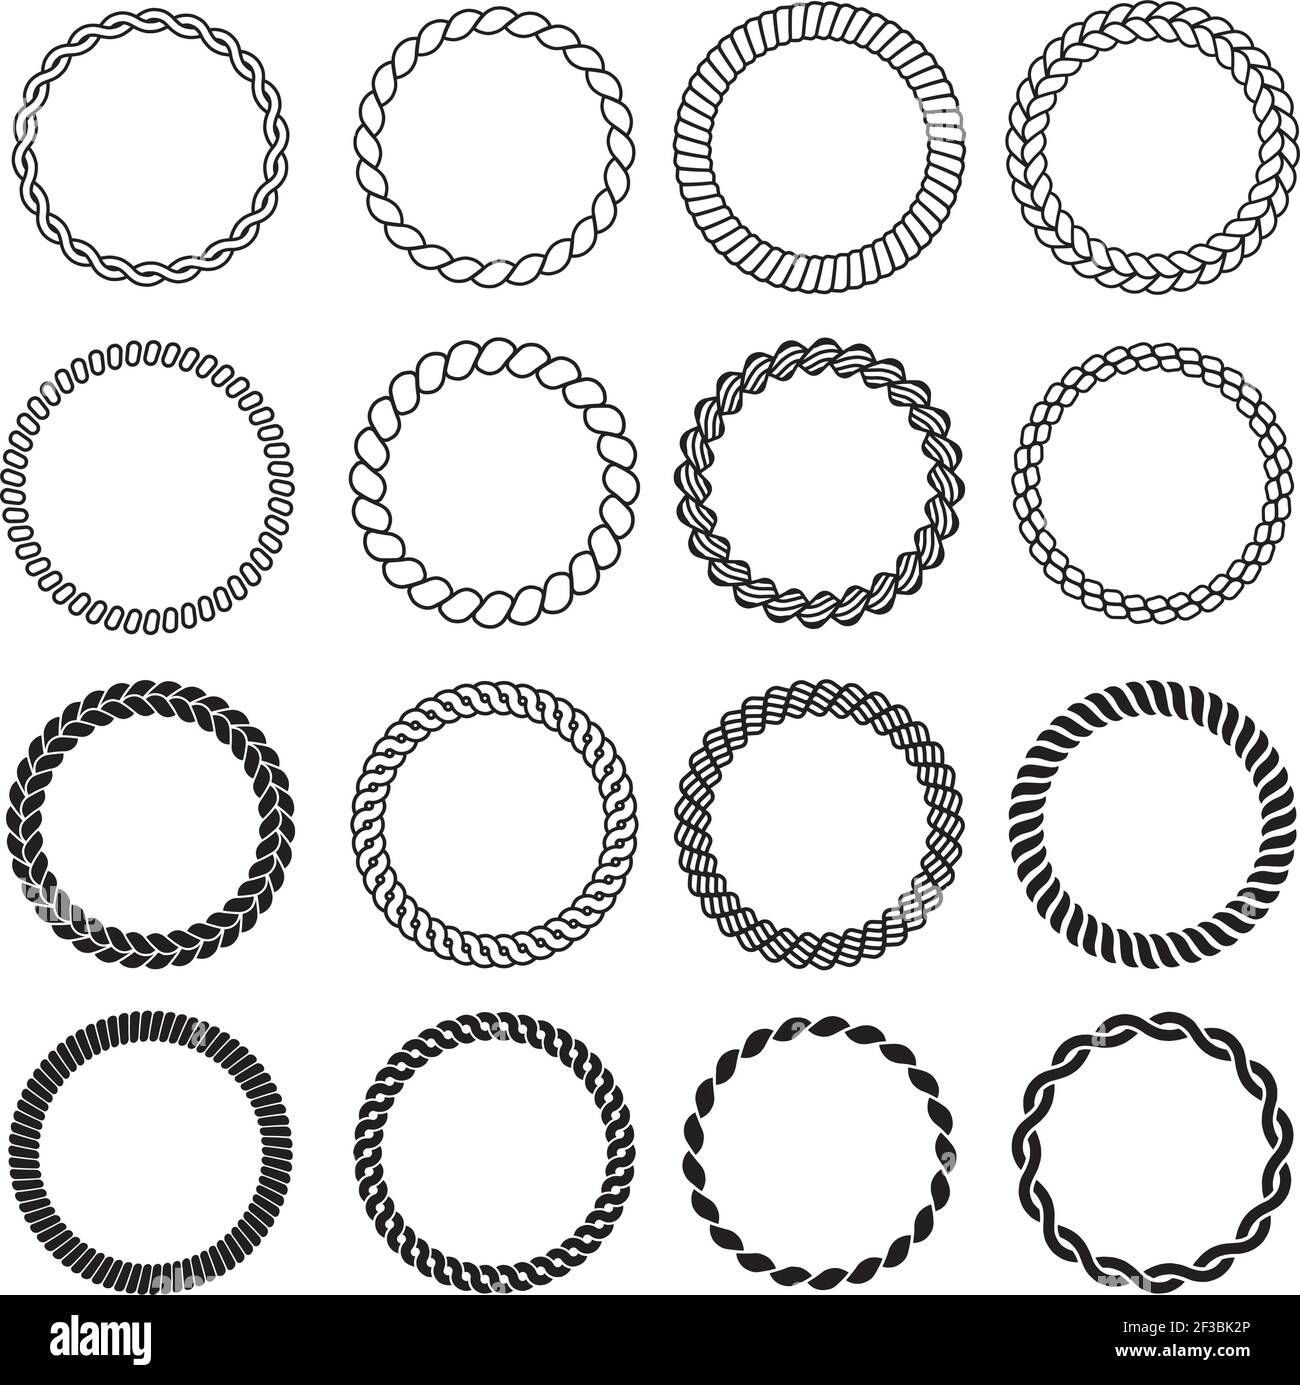 Round rope shapes. Circle nautical frame for labels decorative sea knot border vector design template Stock Vector